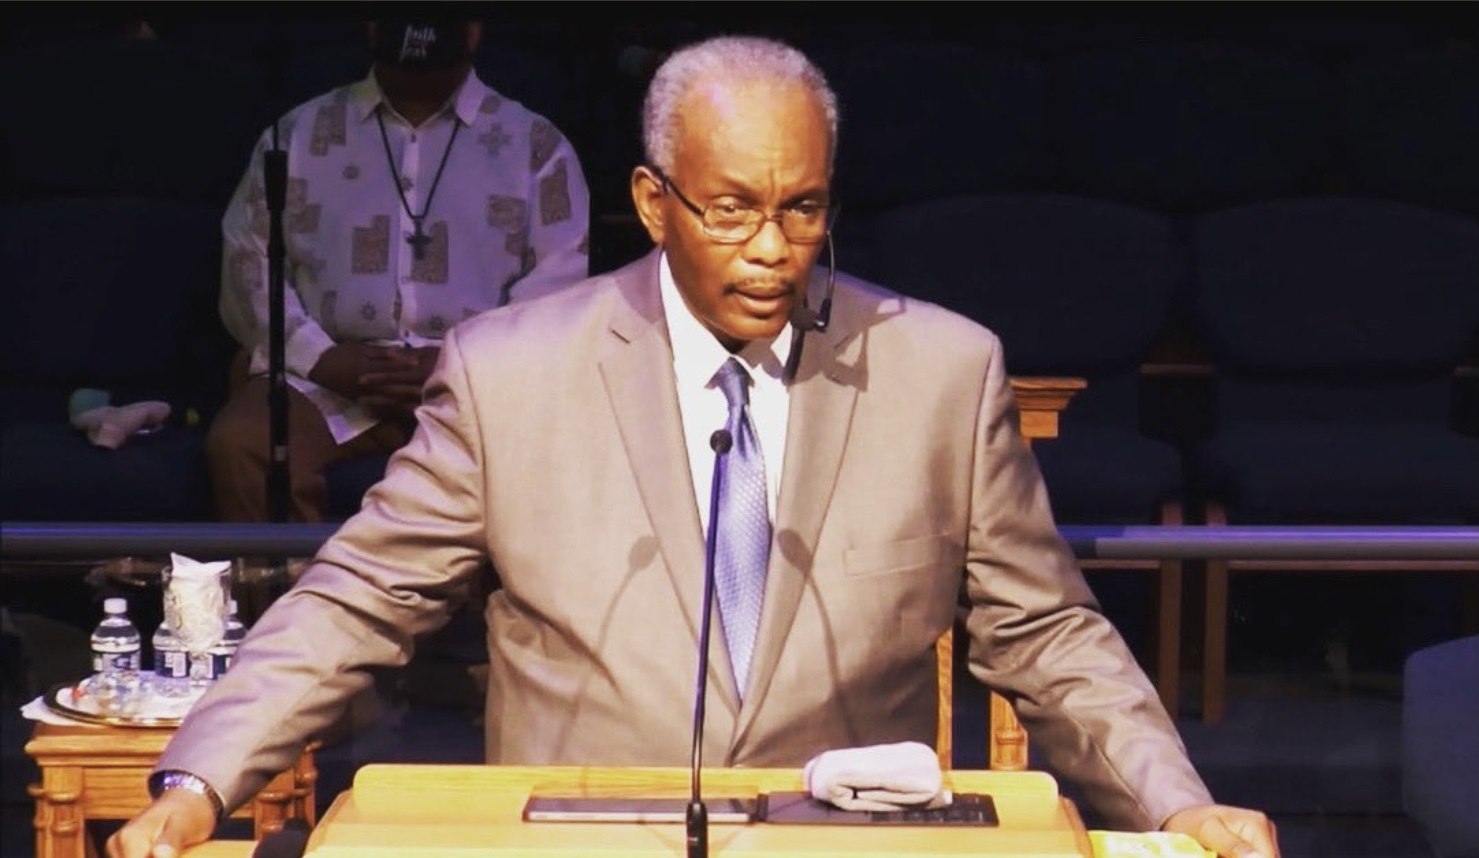 Indisputably King Rev. Dr. Willie E. Robinson